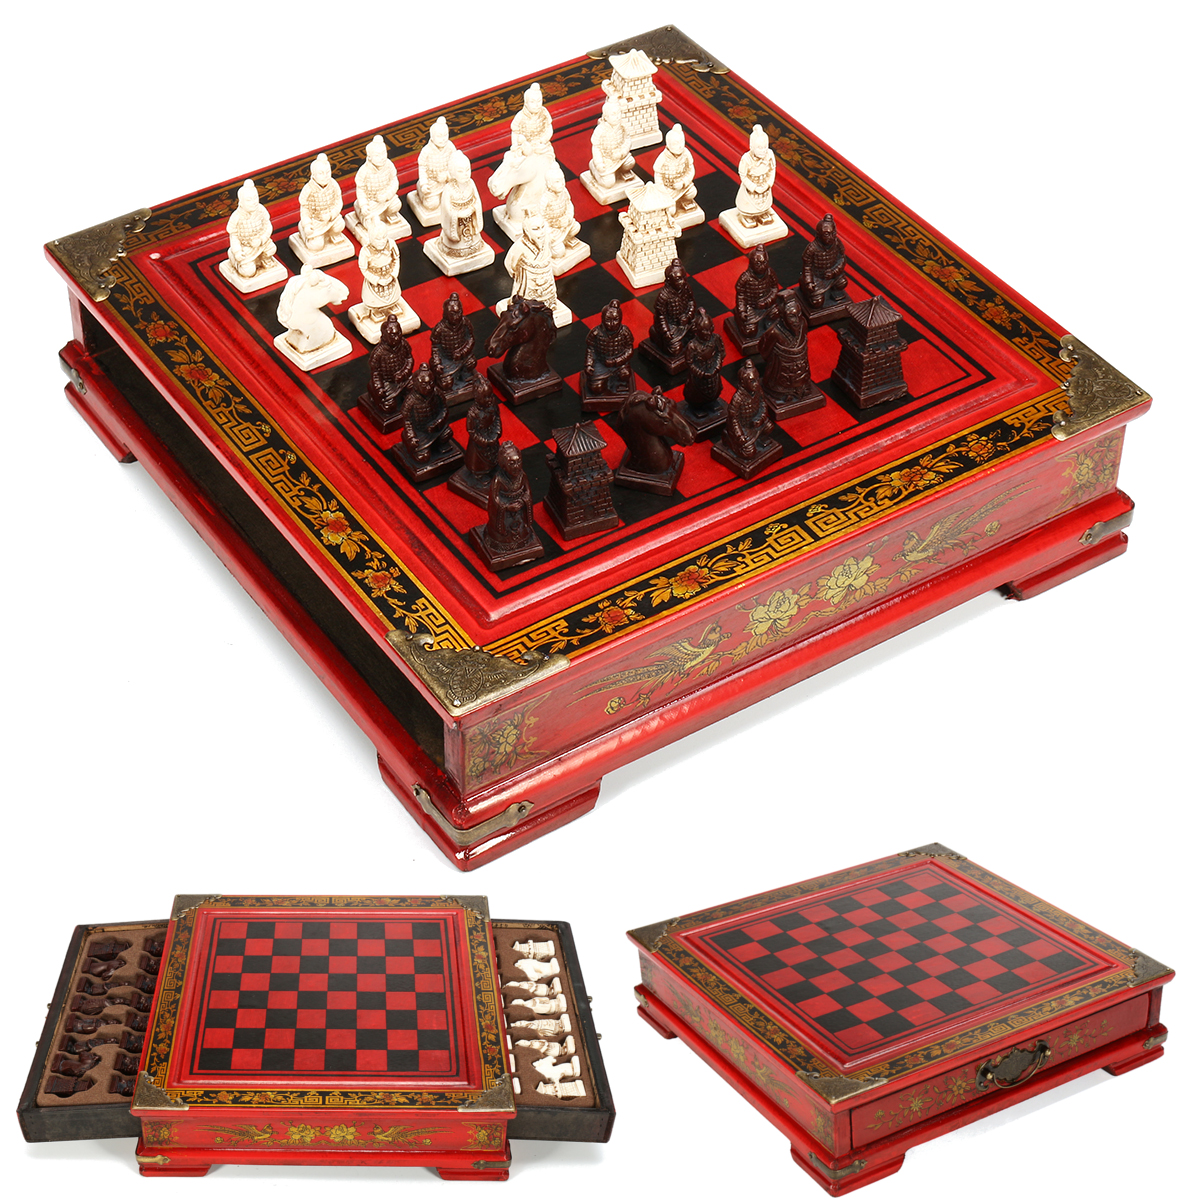 Vintage-Wooden-Chinese-Chess-Board-Table-Game-Set-Pieces-Gift-Toy-Collectibles-1454841-2